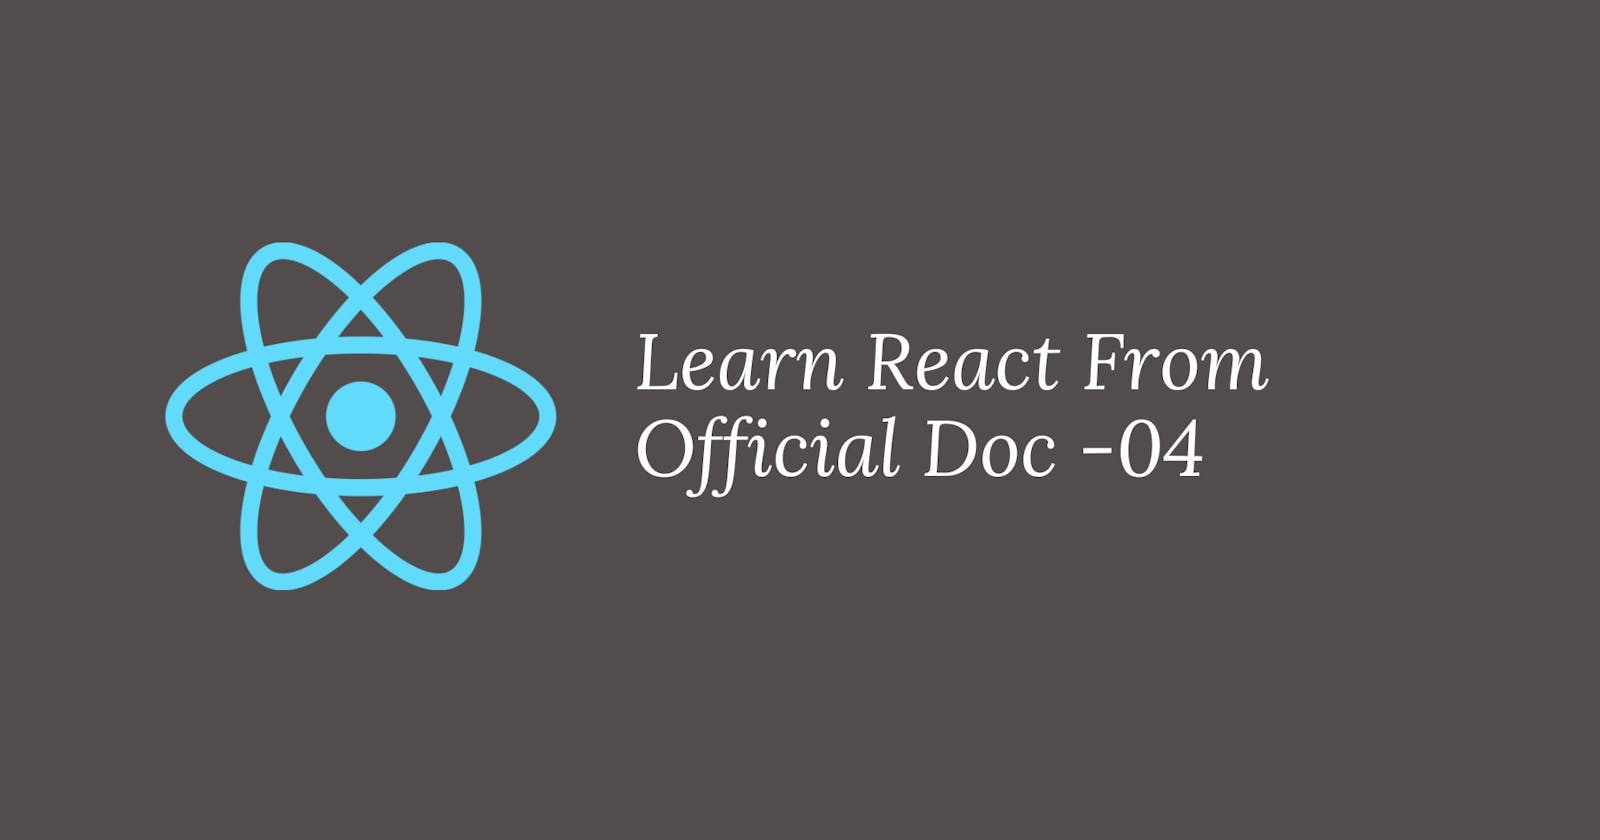 Learn React From Official Doc -04